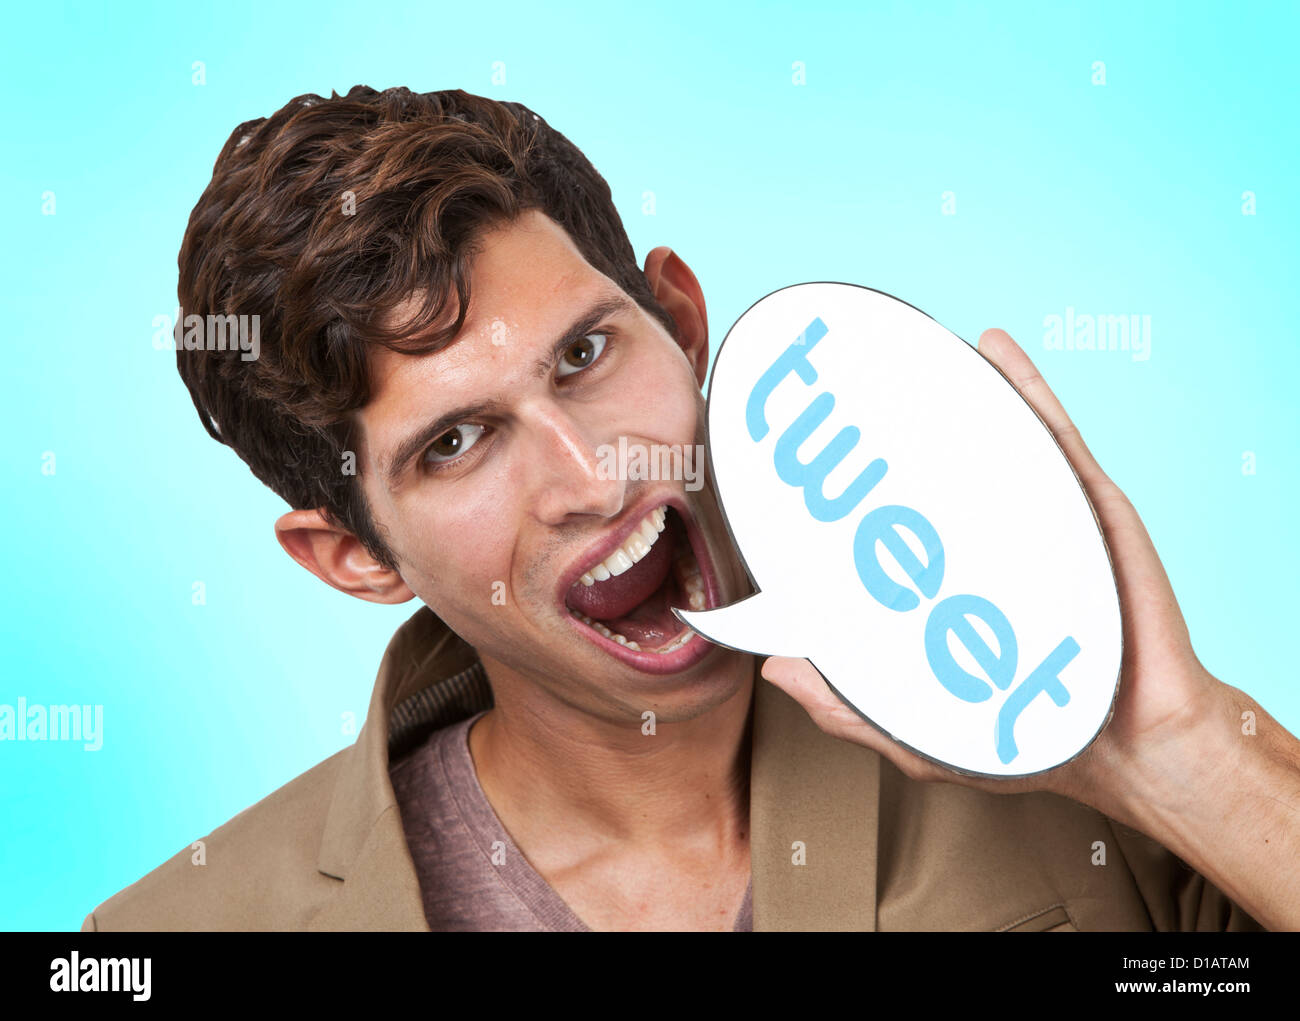 Portrait young man holding tweet word bubble Stock Photo